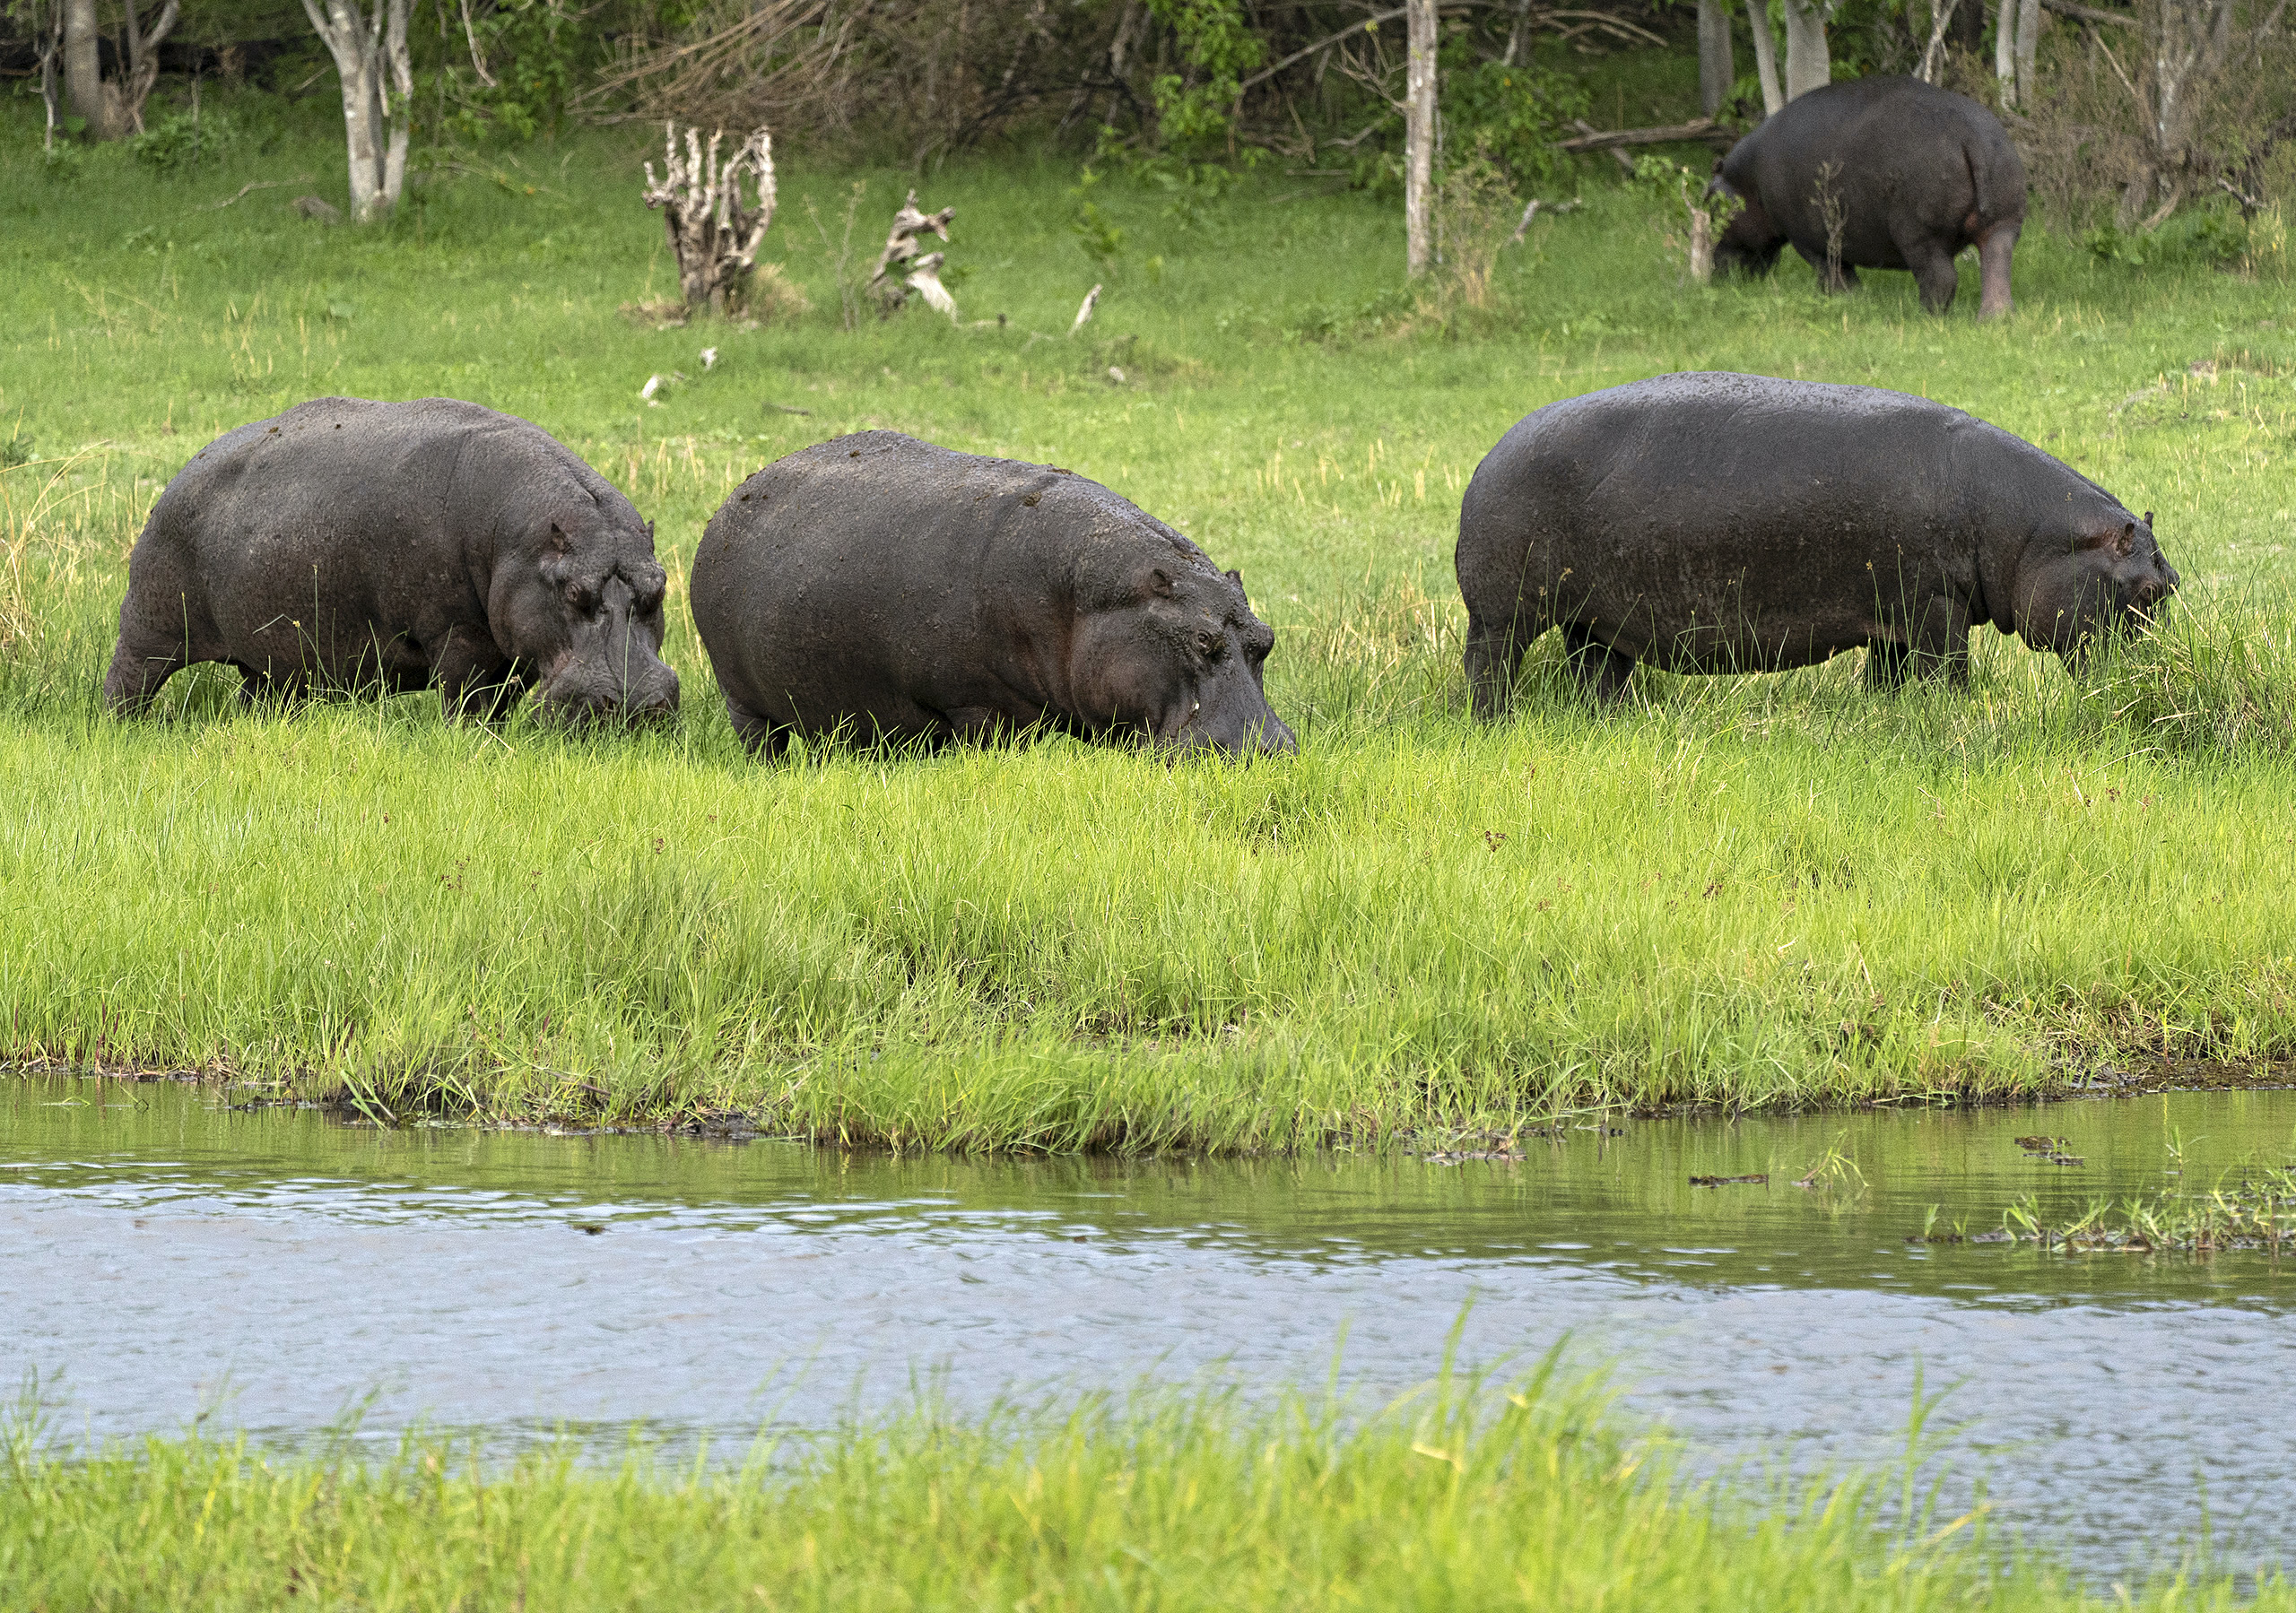 Hippos in front of tent